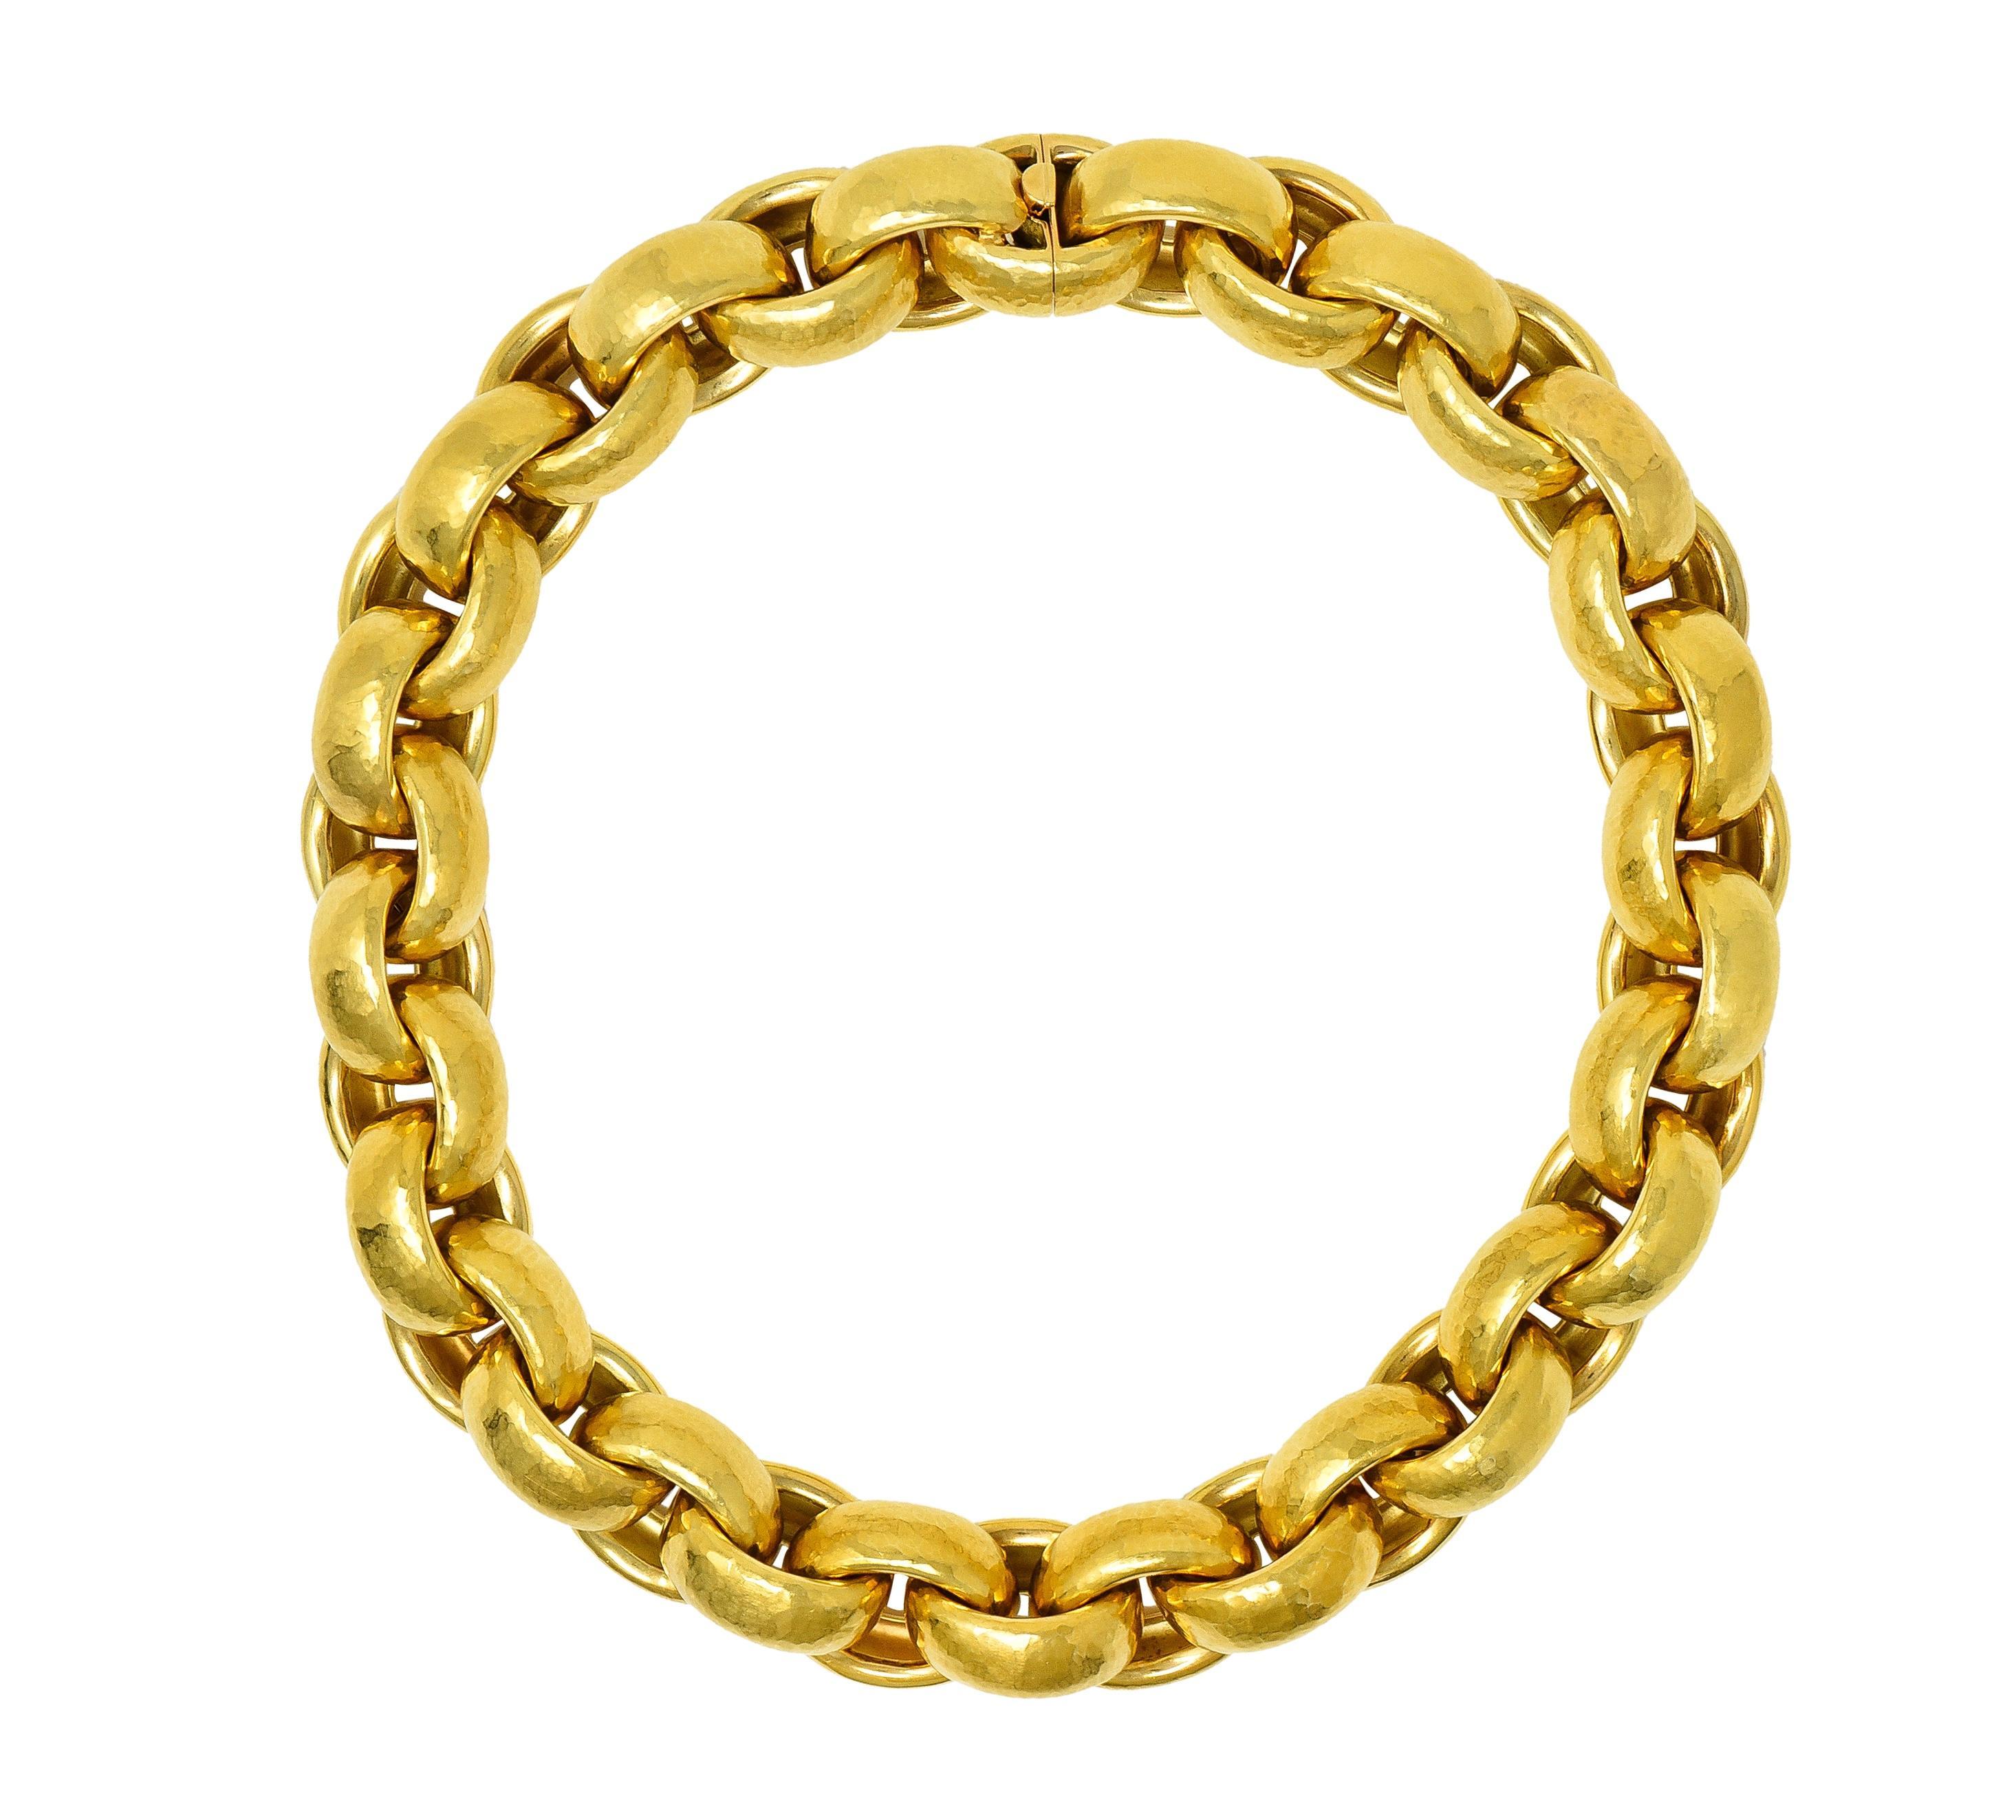 1989 Paloma Picasso Tiffany & Co. 18 Karat Yellow Gold Hammered Link Necklace For Sale 4